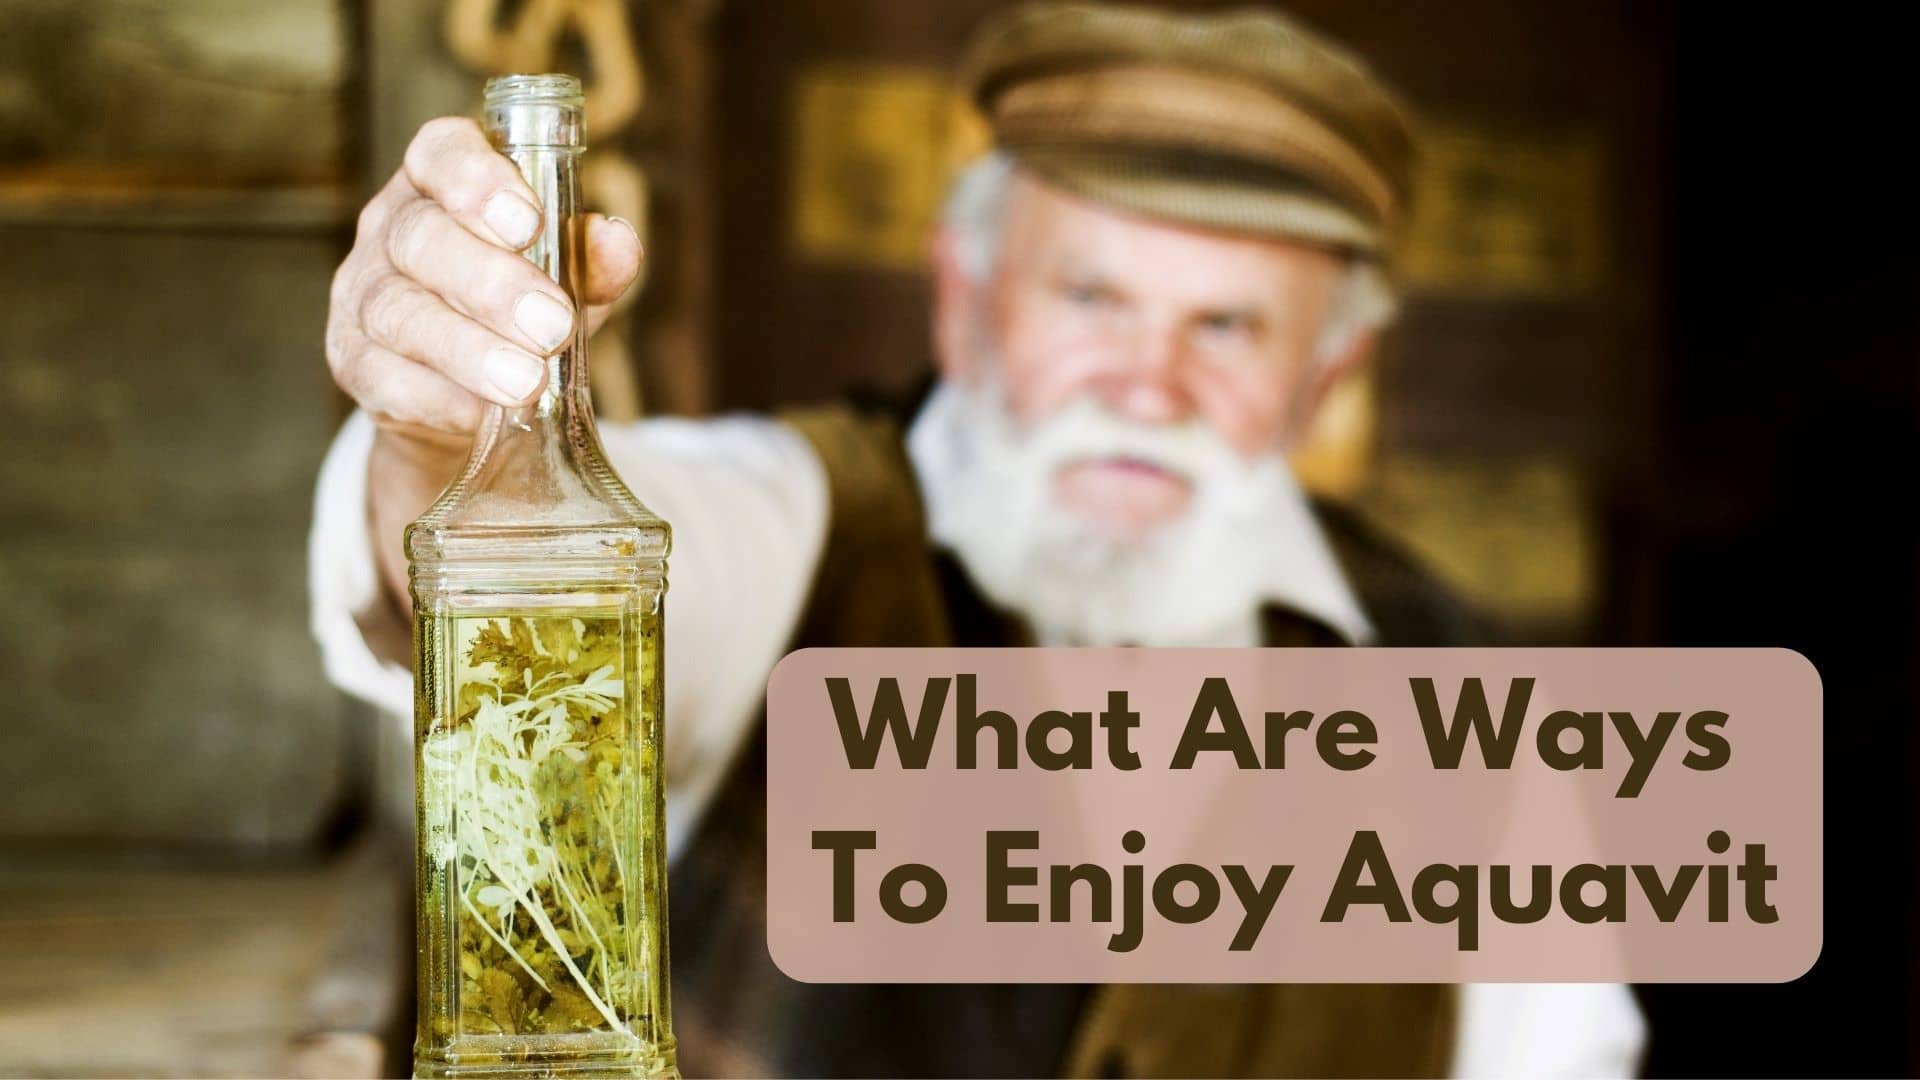 What Are Some Recommended Ways To Enjoy Aquavit